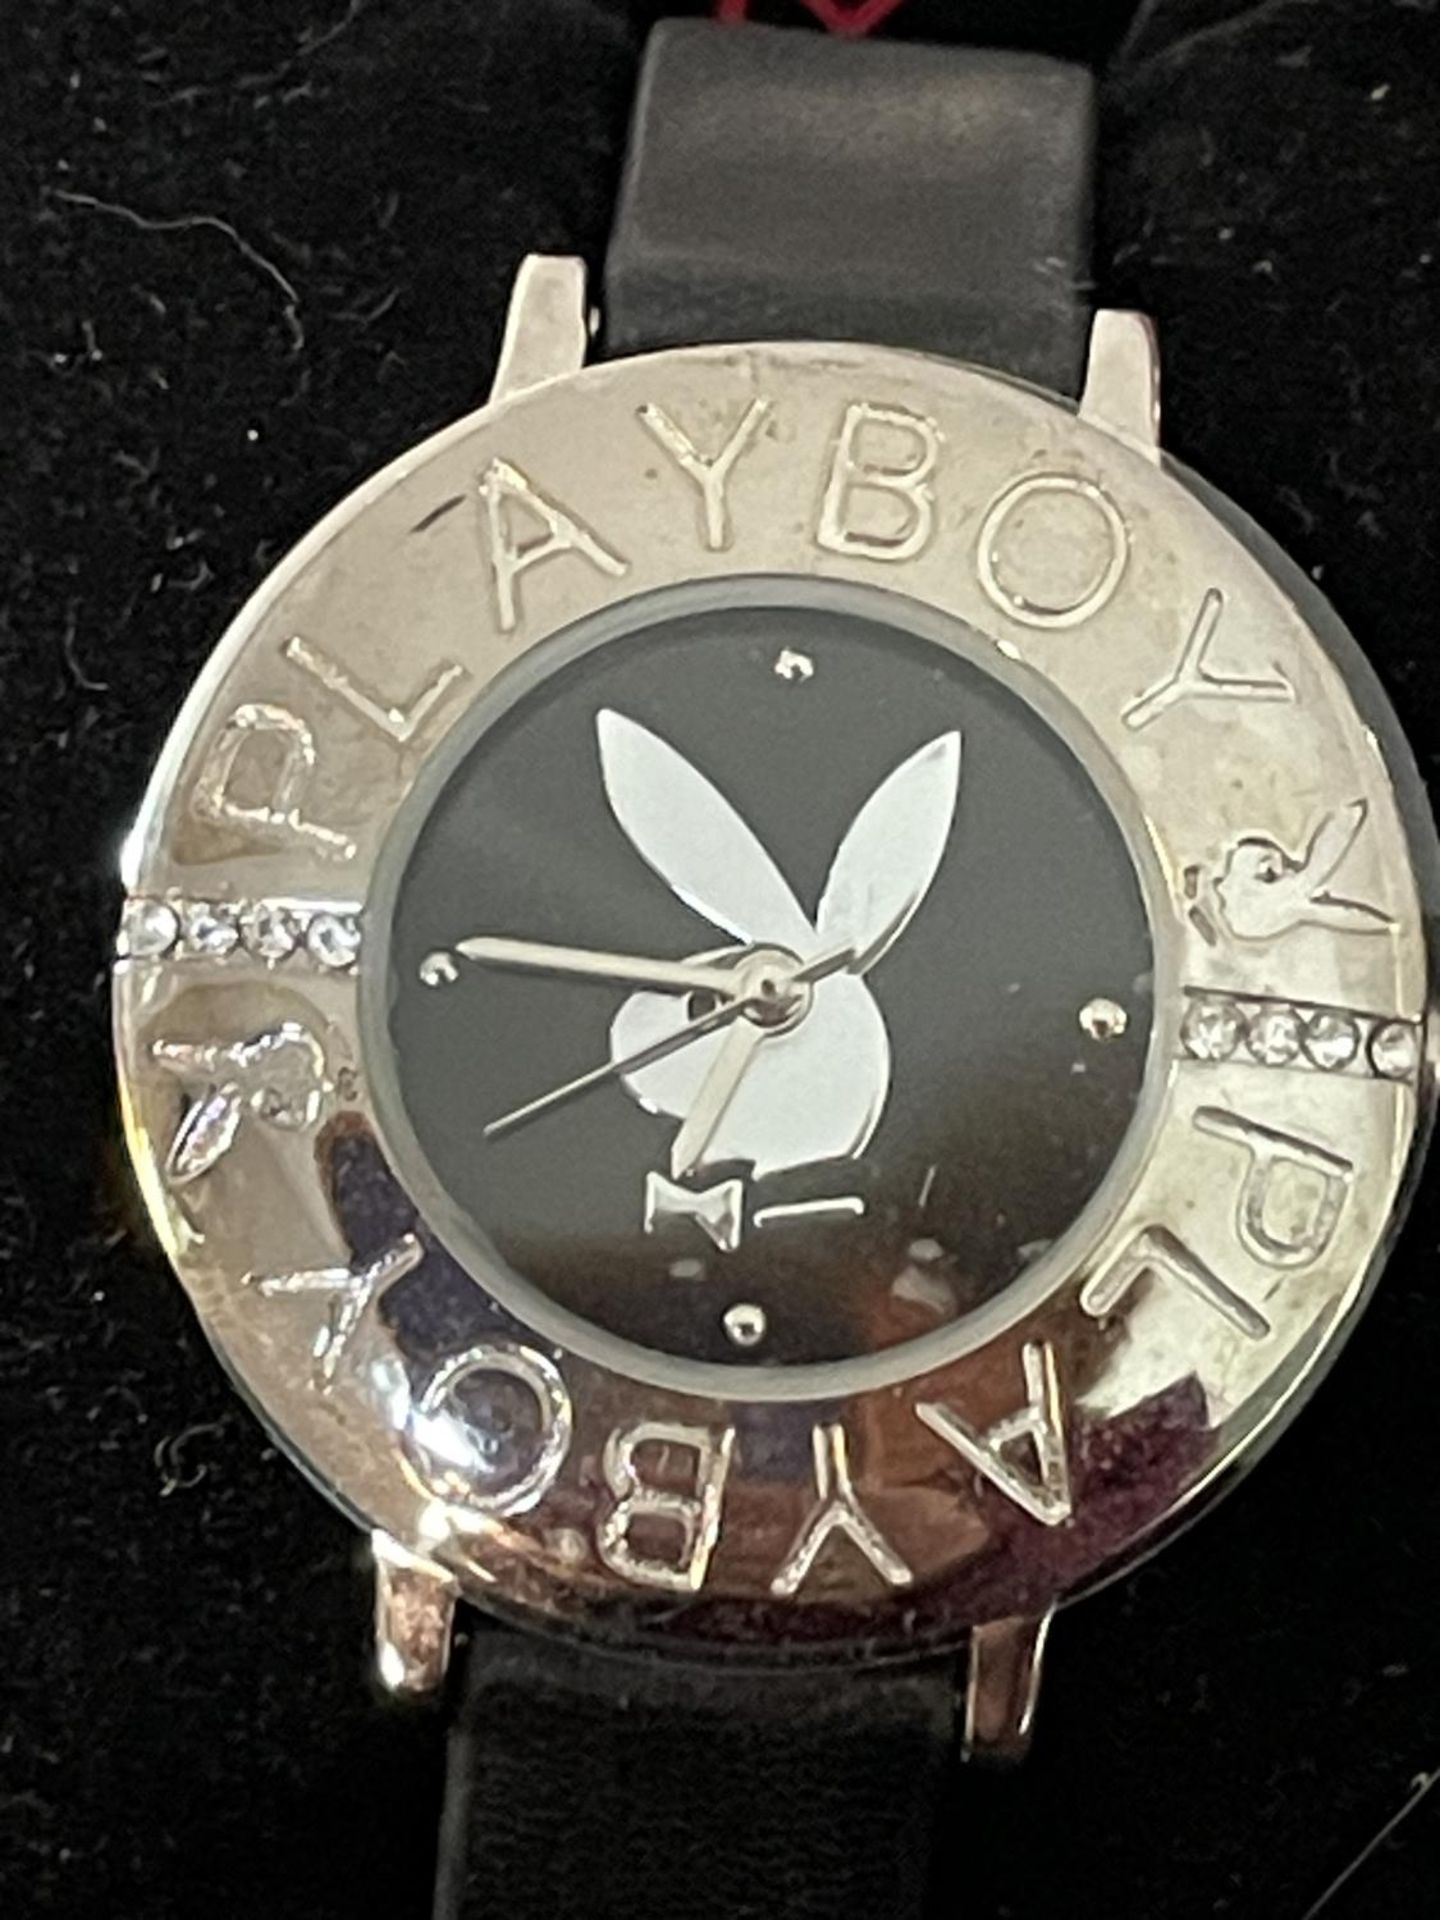 A PLAYBOY WATCH IN A PRESENTATION BOX SEEN WORKING BUT NO WARRANTY - Image 2 of 4